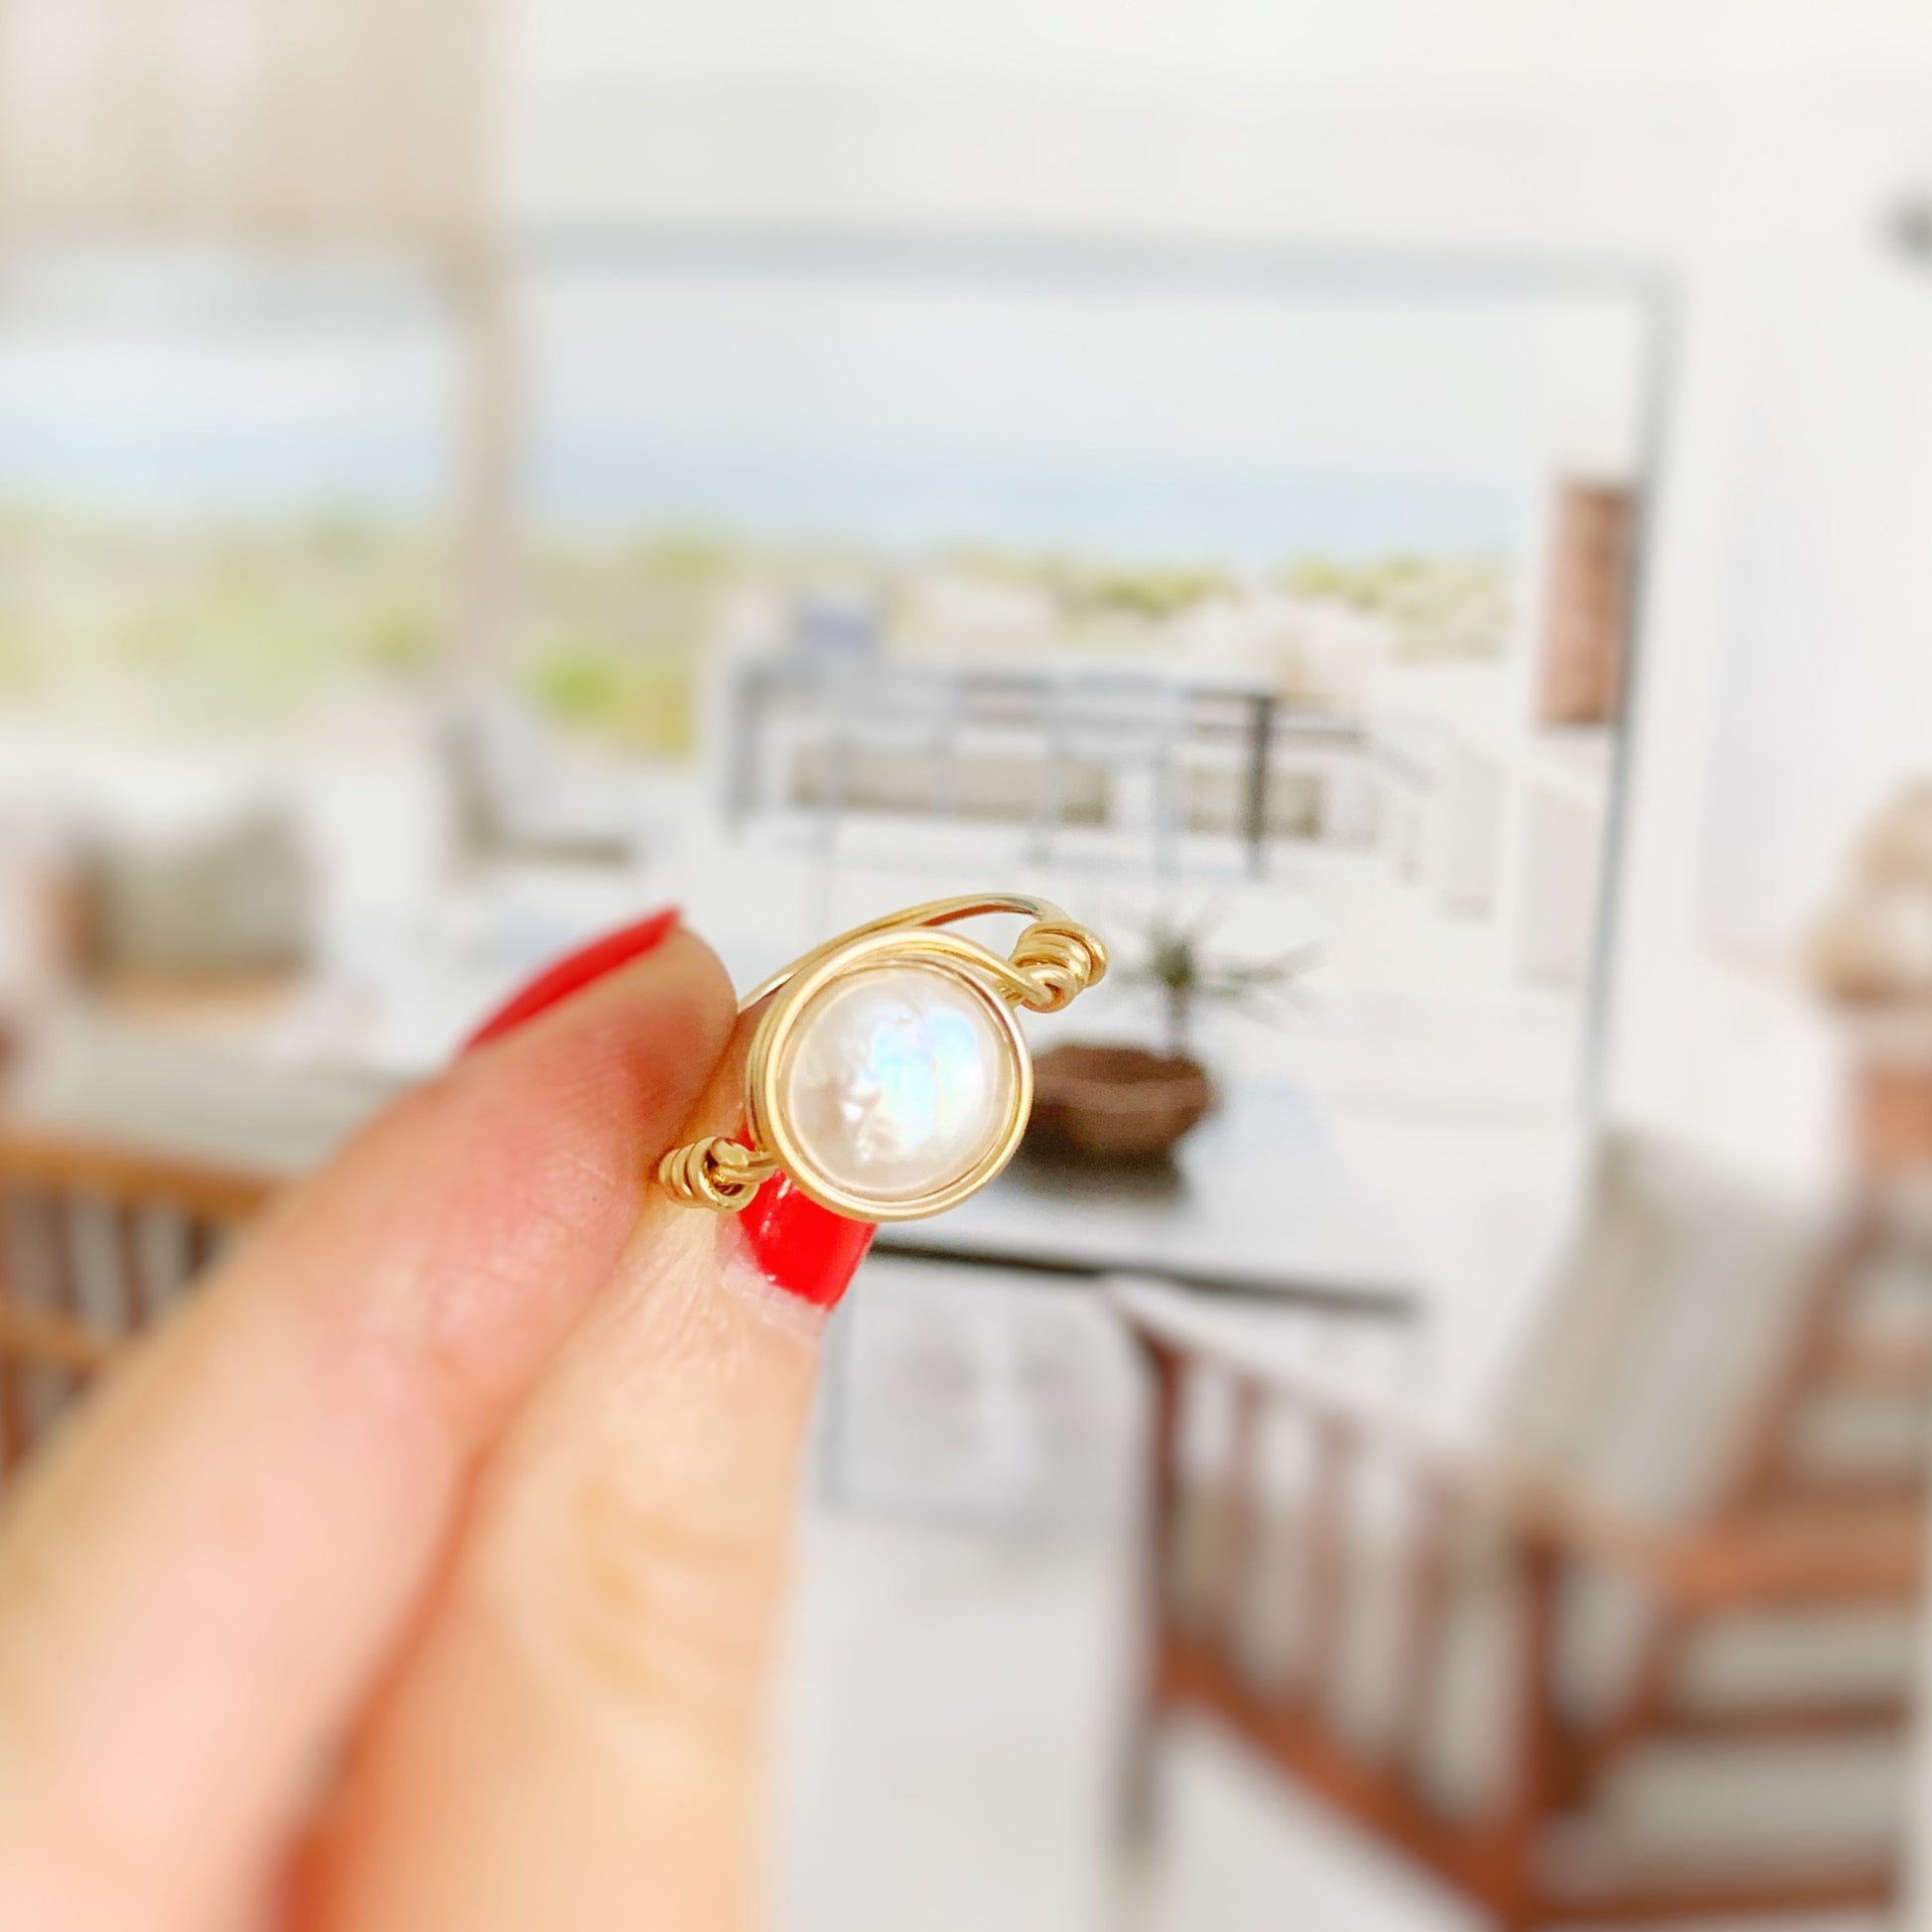 Newport Pearl Ring in 14k gold filled by mermaids and madeleines. this ring is a wire wrapped ring that features a freshwater coin pearl wire wrapped in 14k gold filled wire creating an artful and simple every day ring. this ring is photographed held between fingers in front of a blurred living room scene